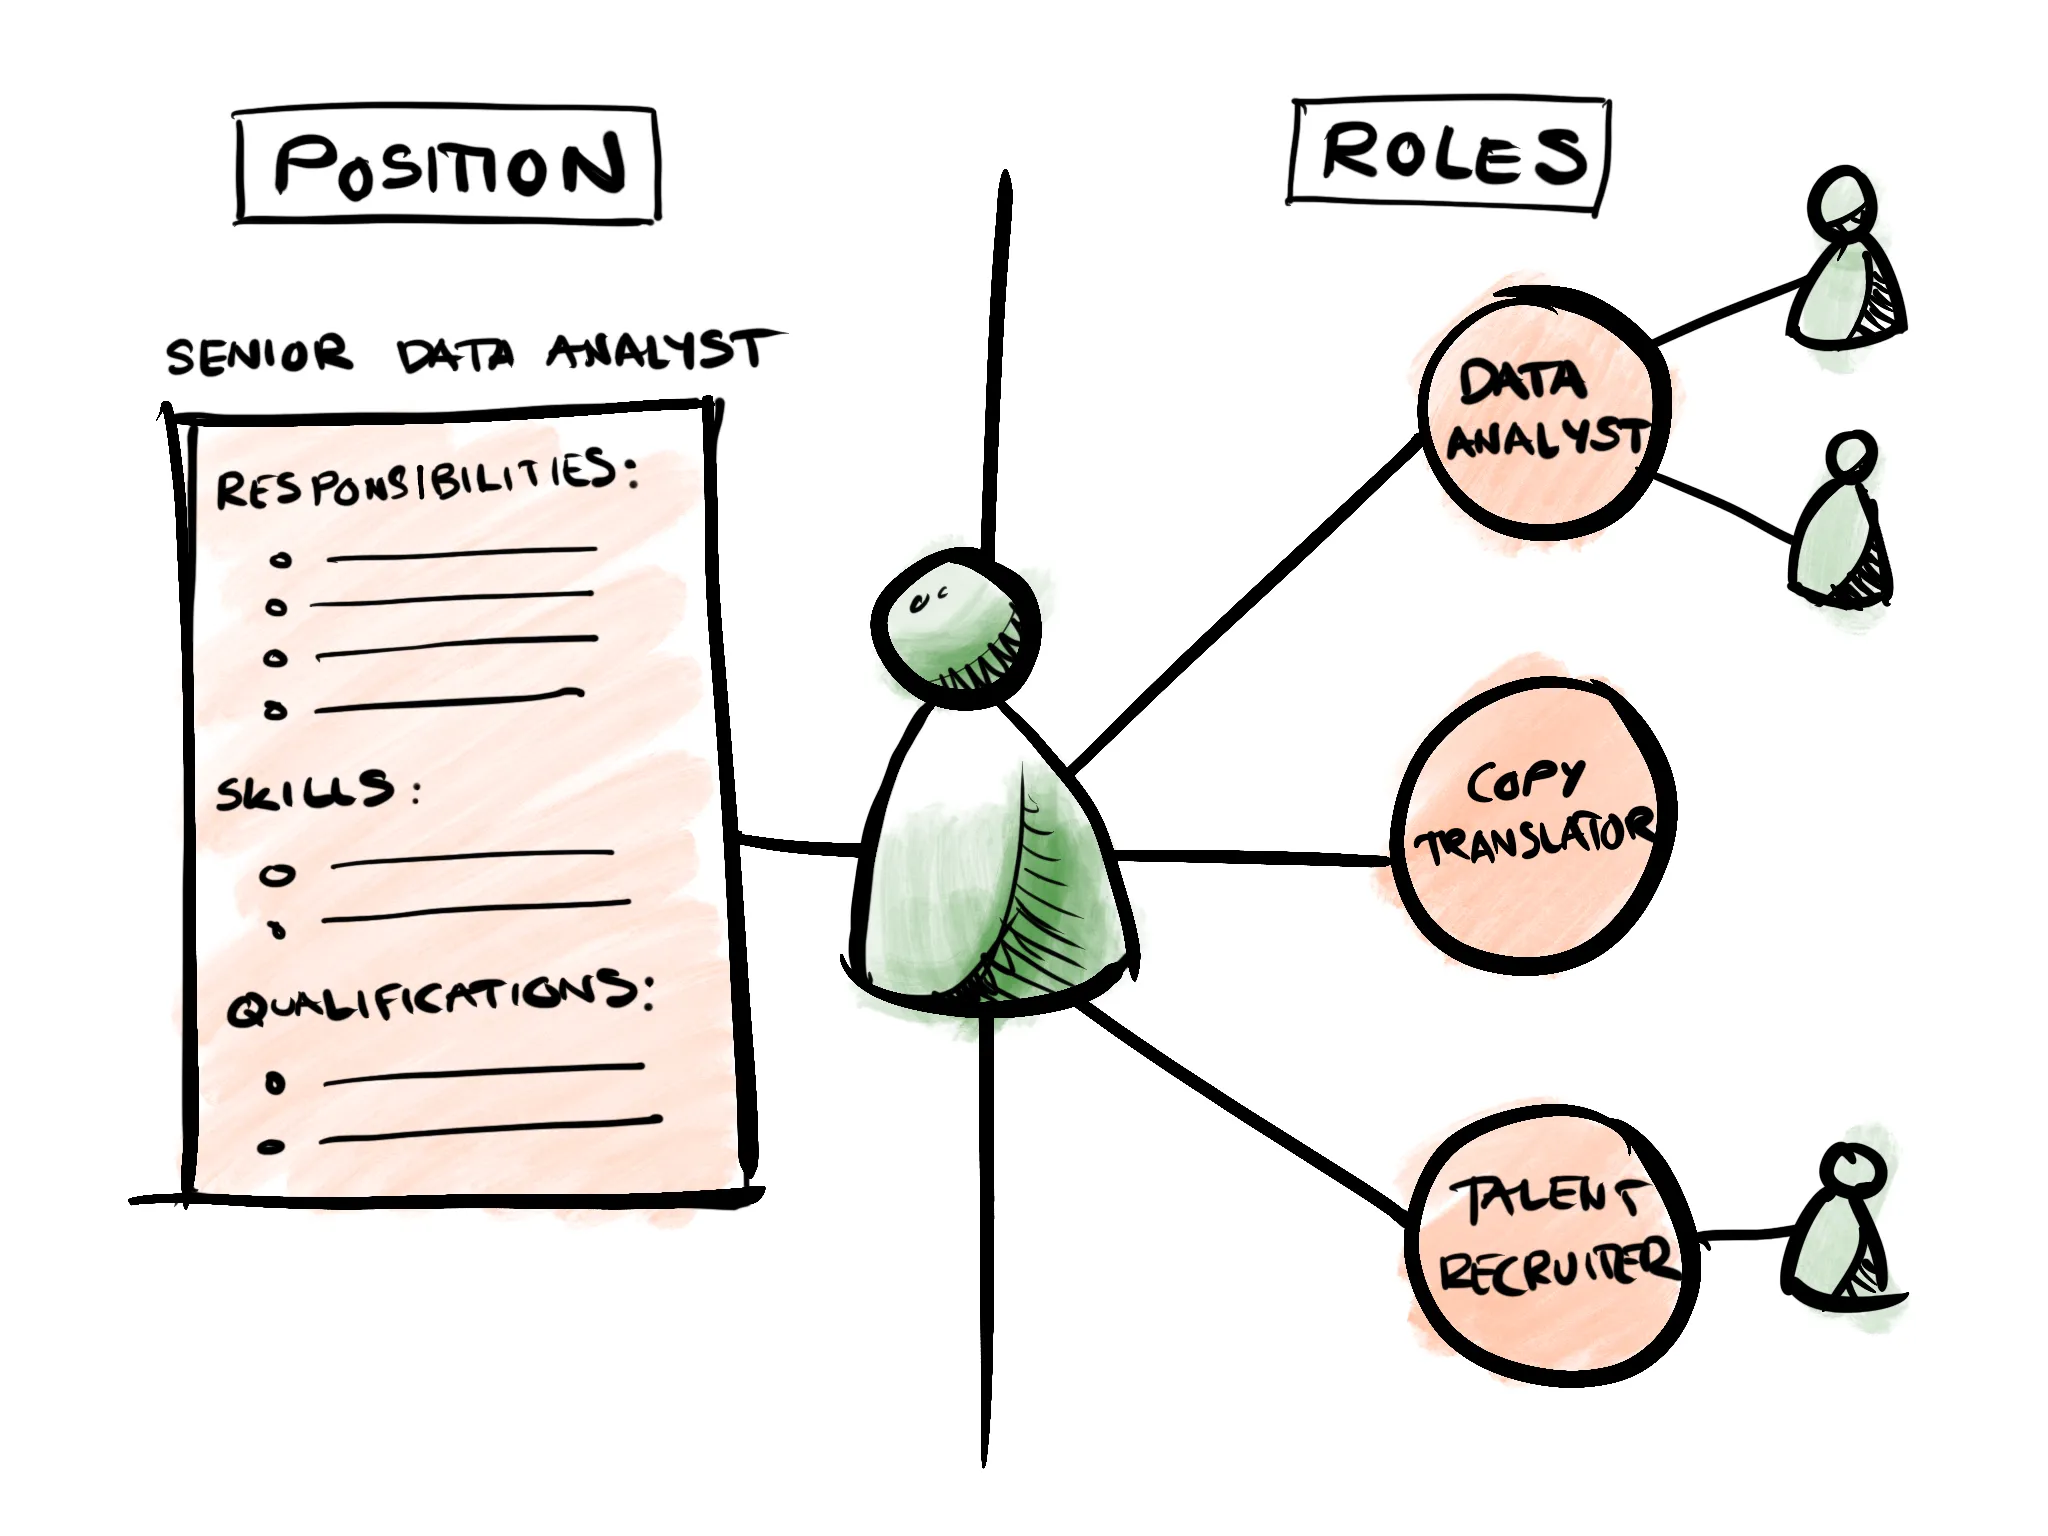 Roles instead of positions